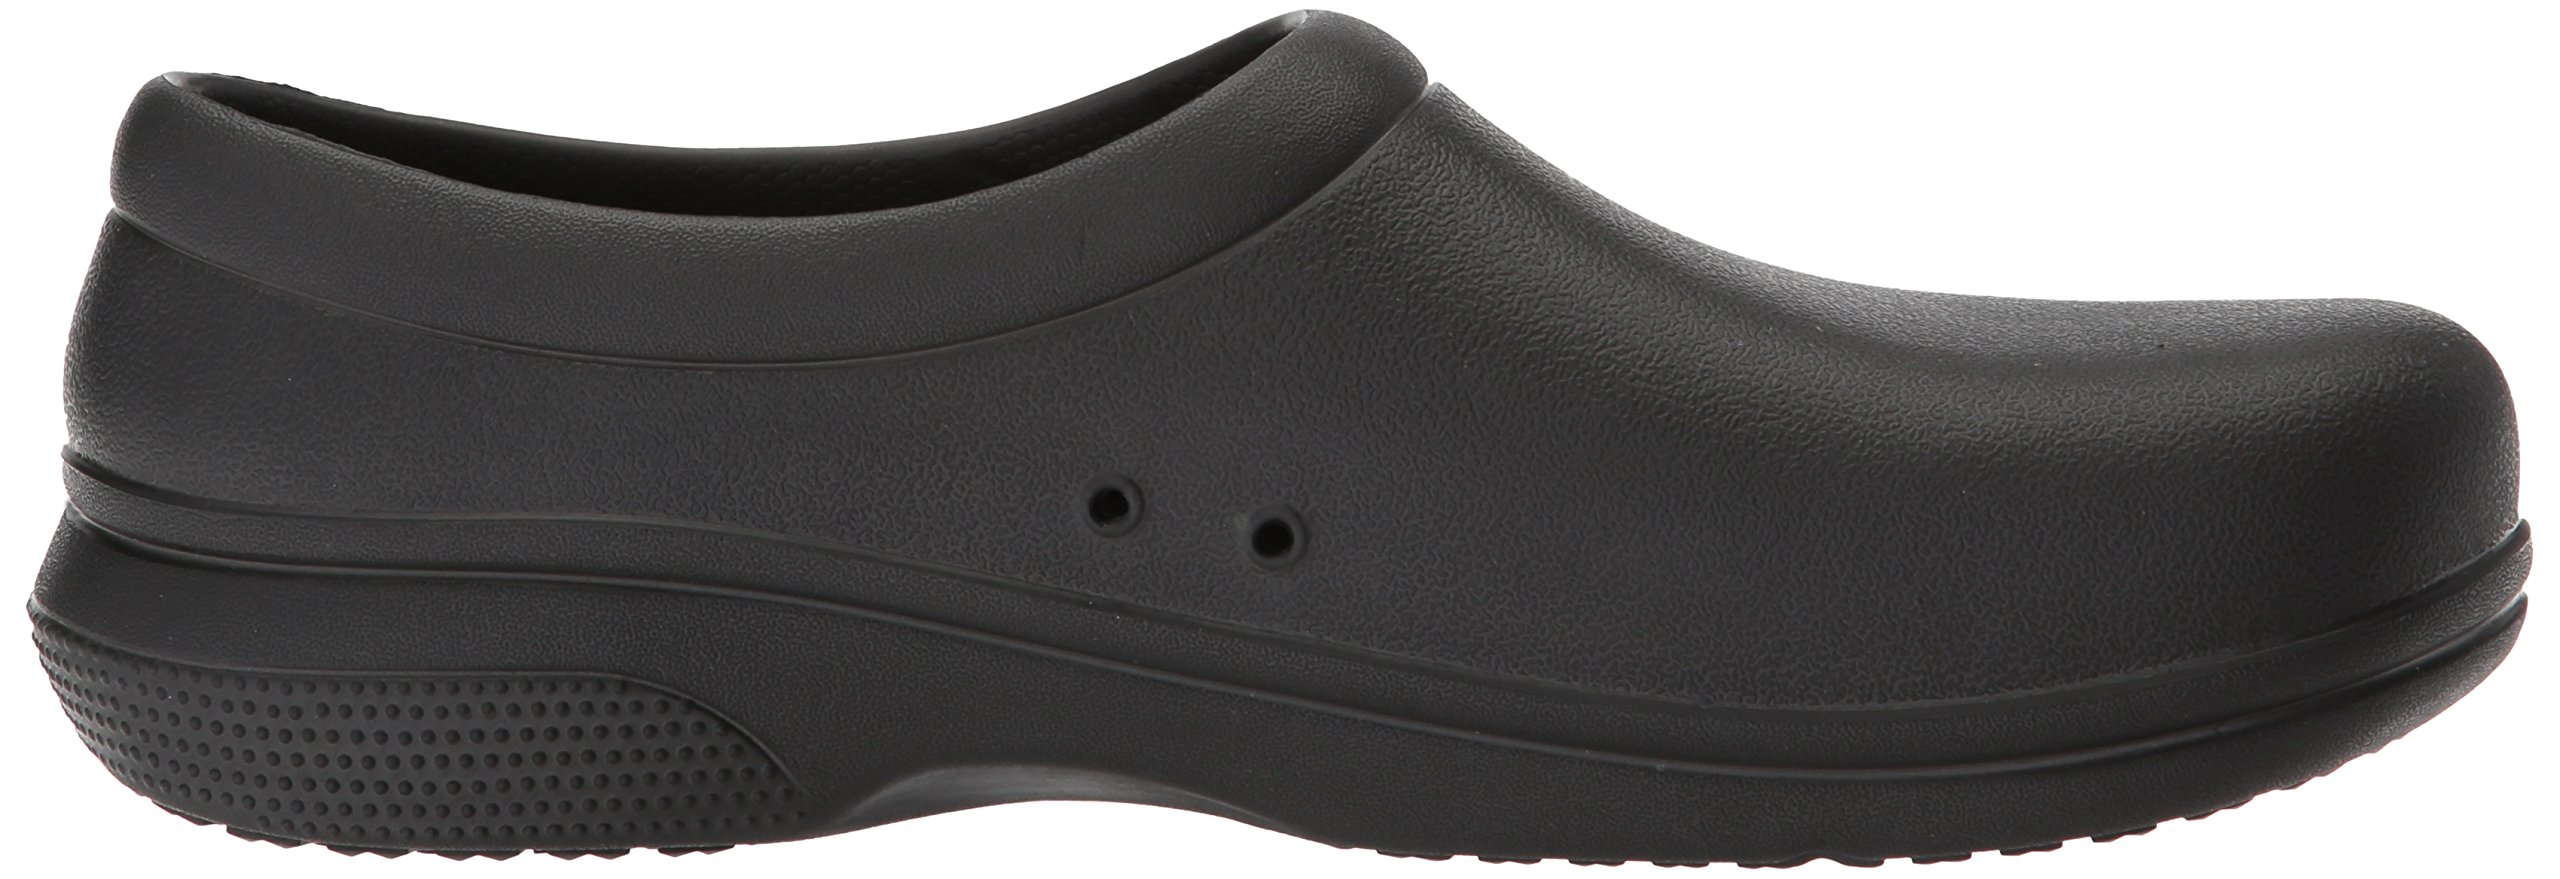 Crocs Unisex-Adult On The Clock Clog, Slip Resistant Shoes for Women and Men